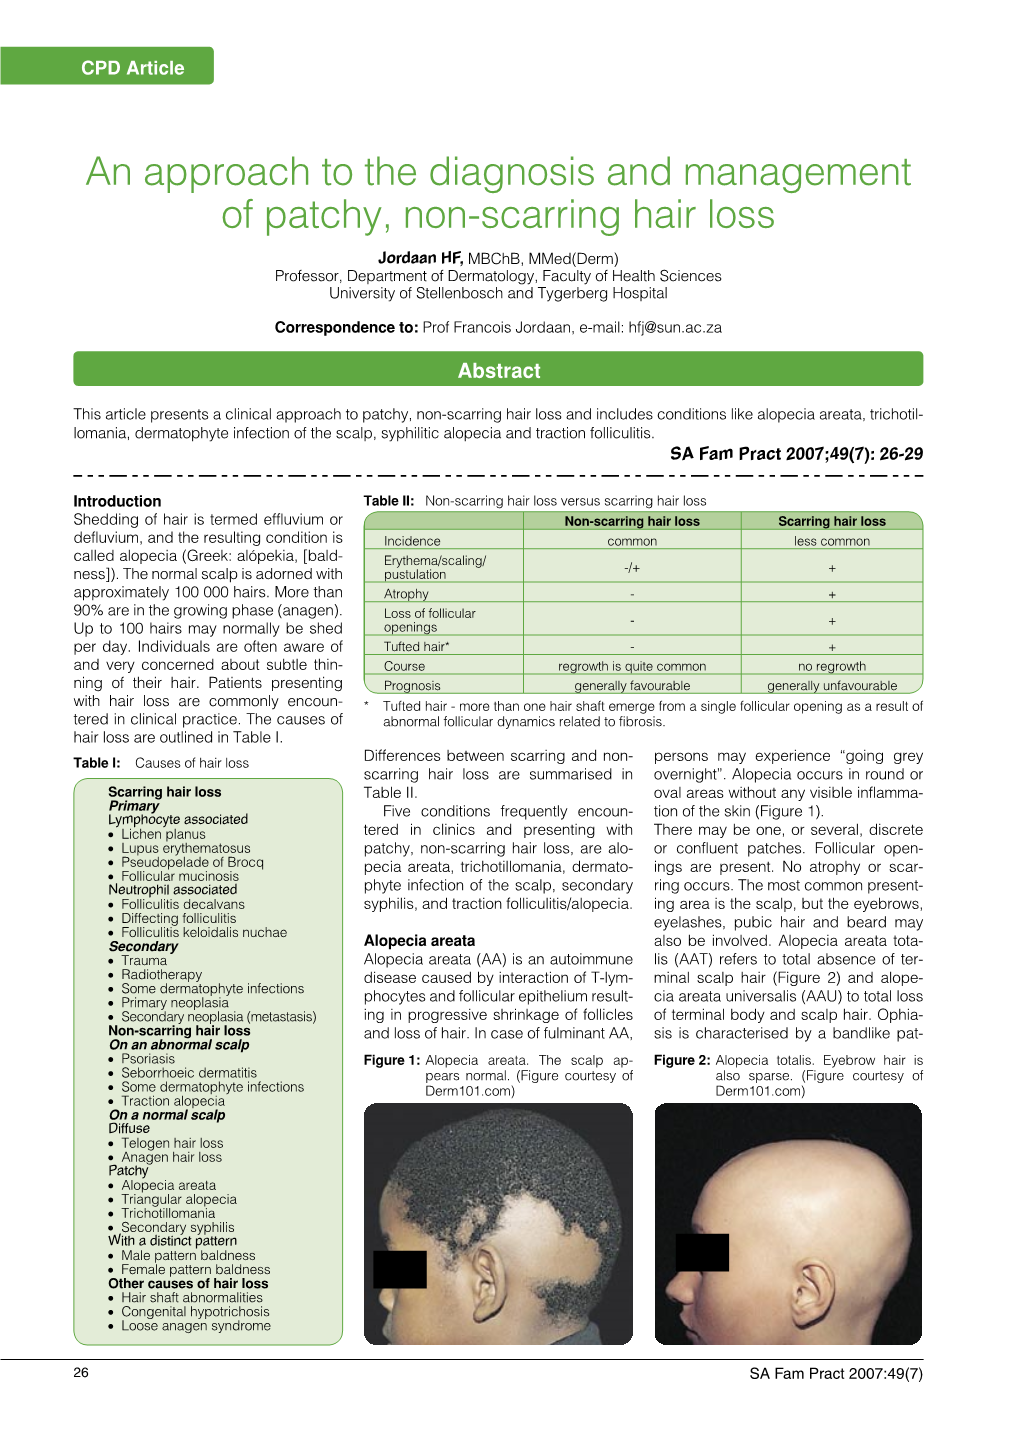 An Approach to the Diagnosis and Management of Patchy, Non-Scarring Hair Loss